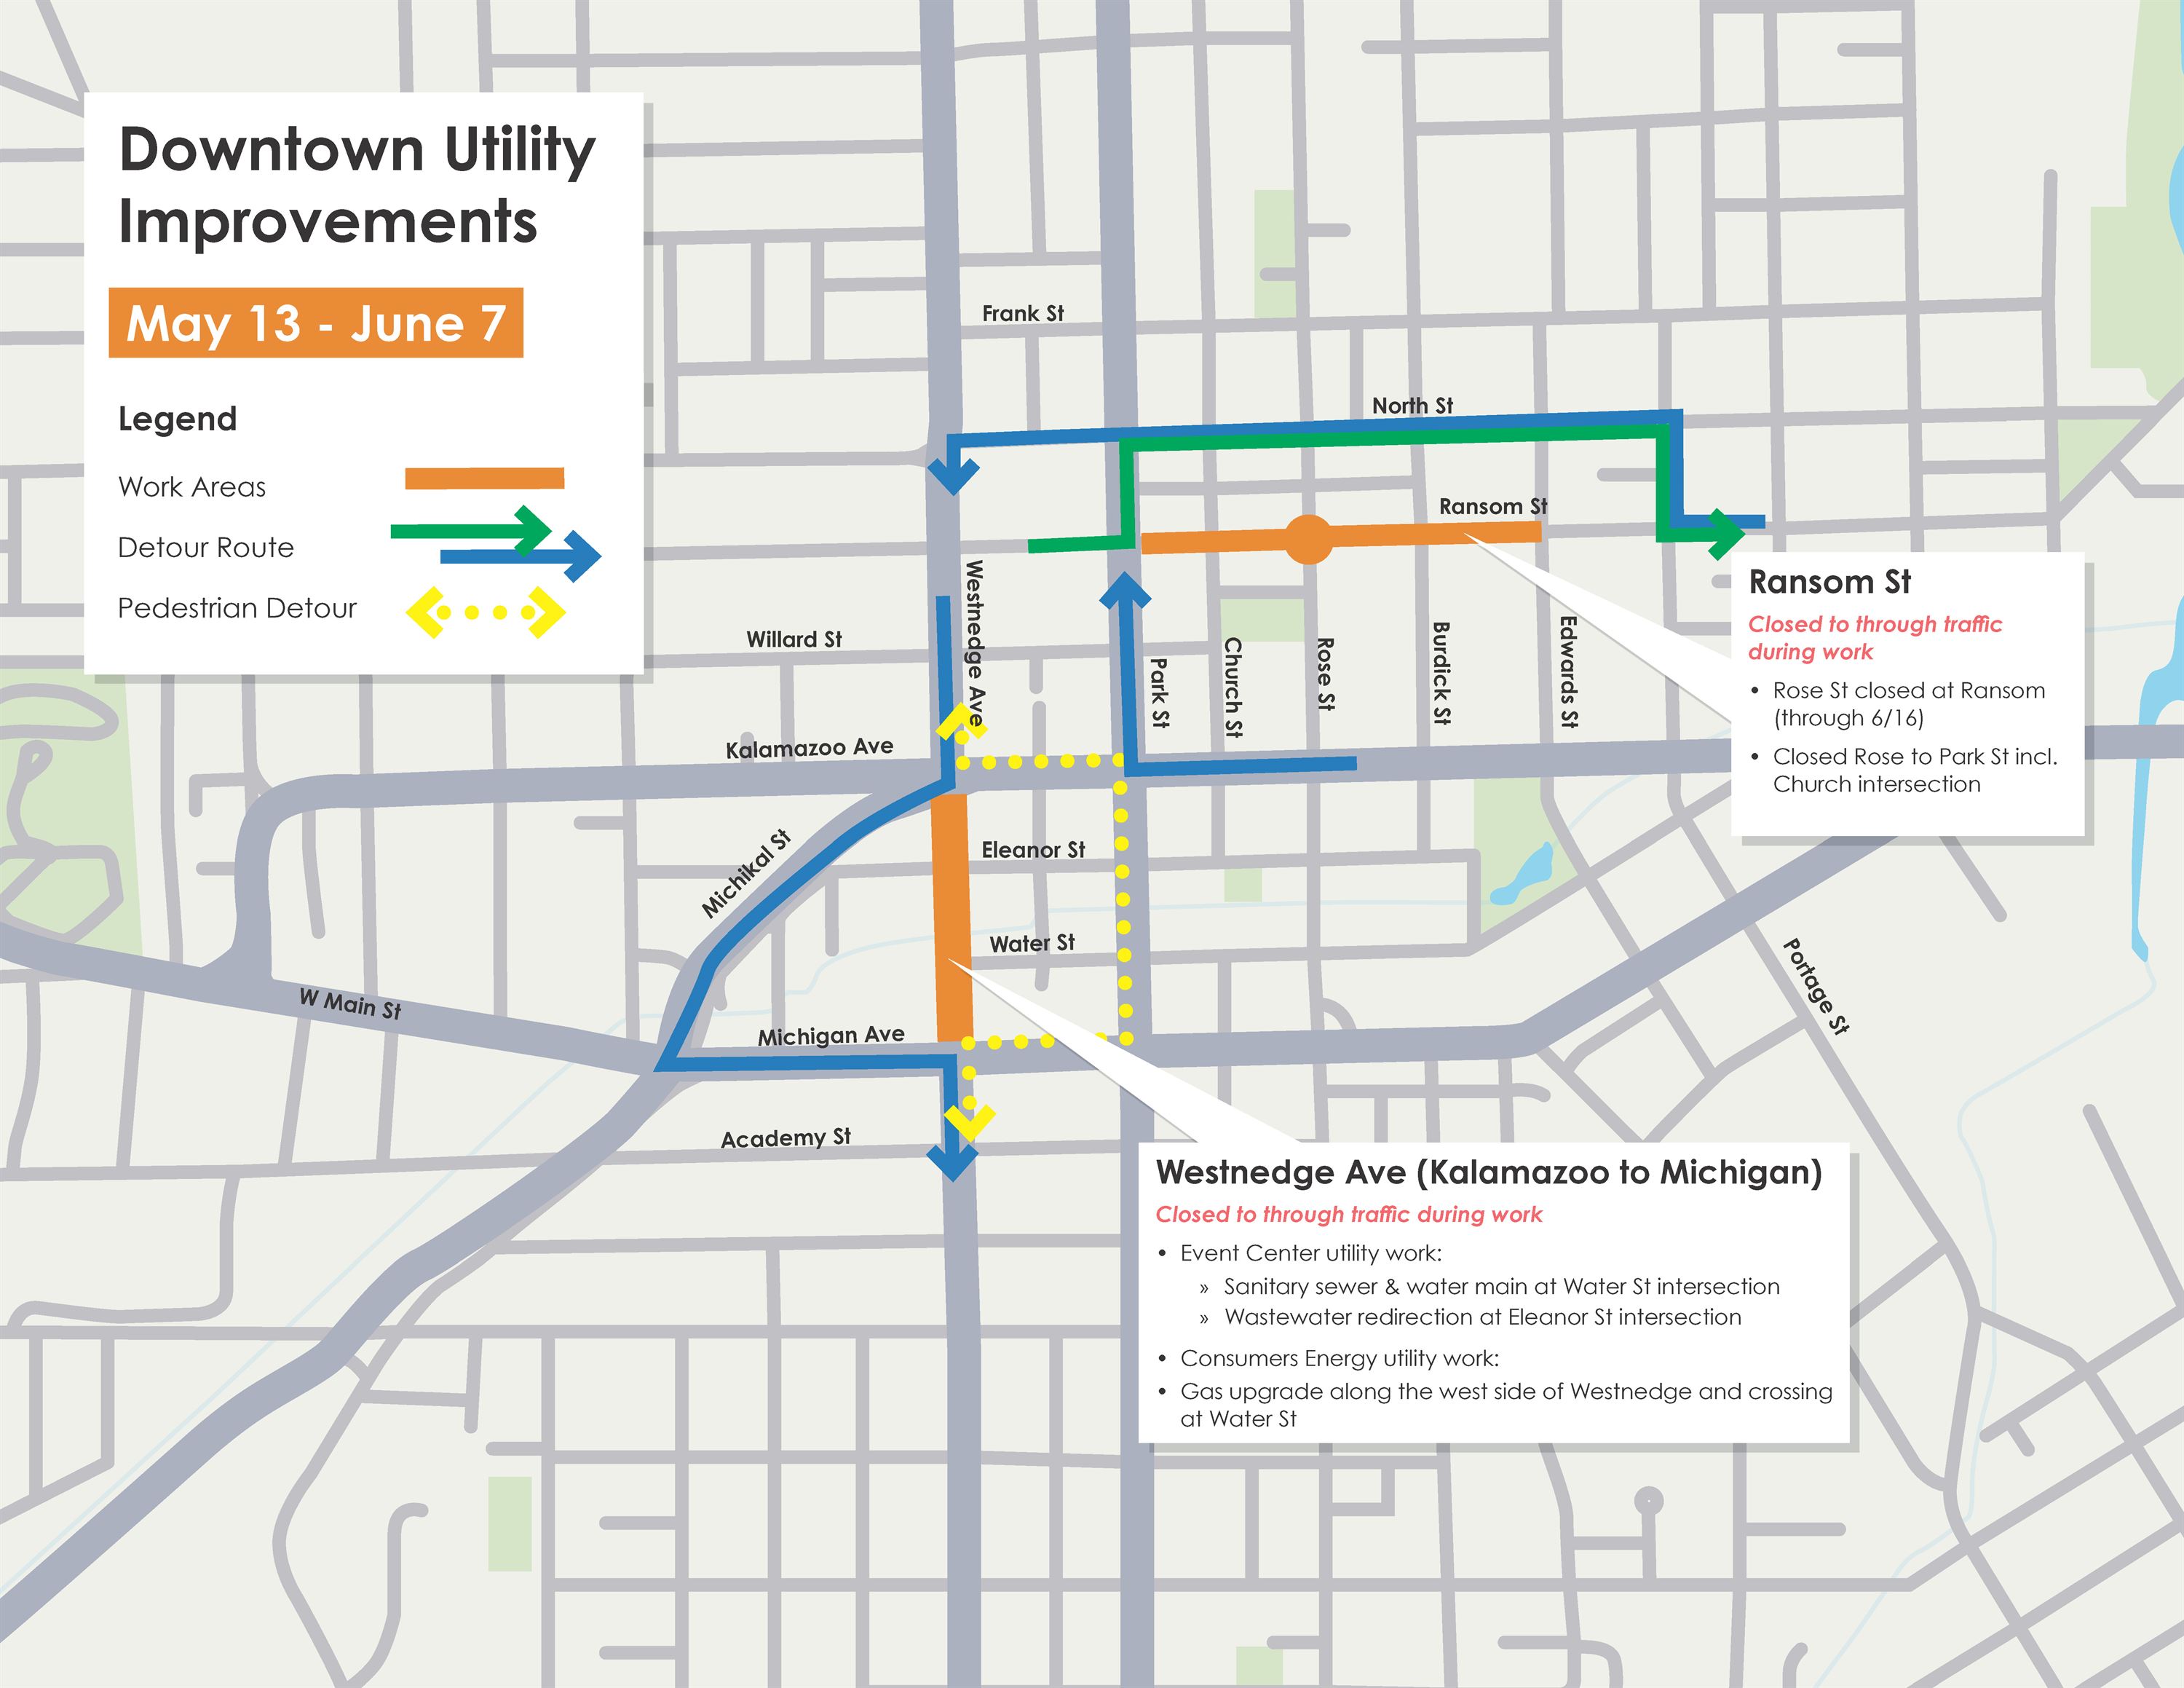 Road closure & detour map for phase one